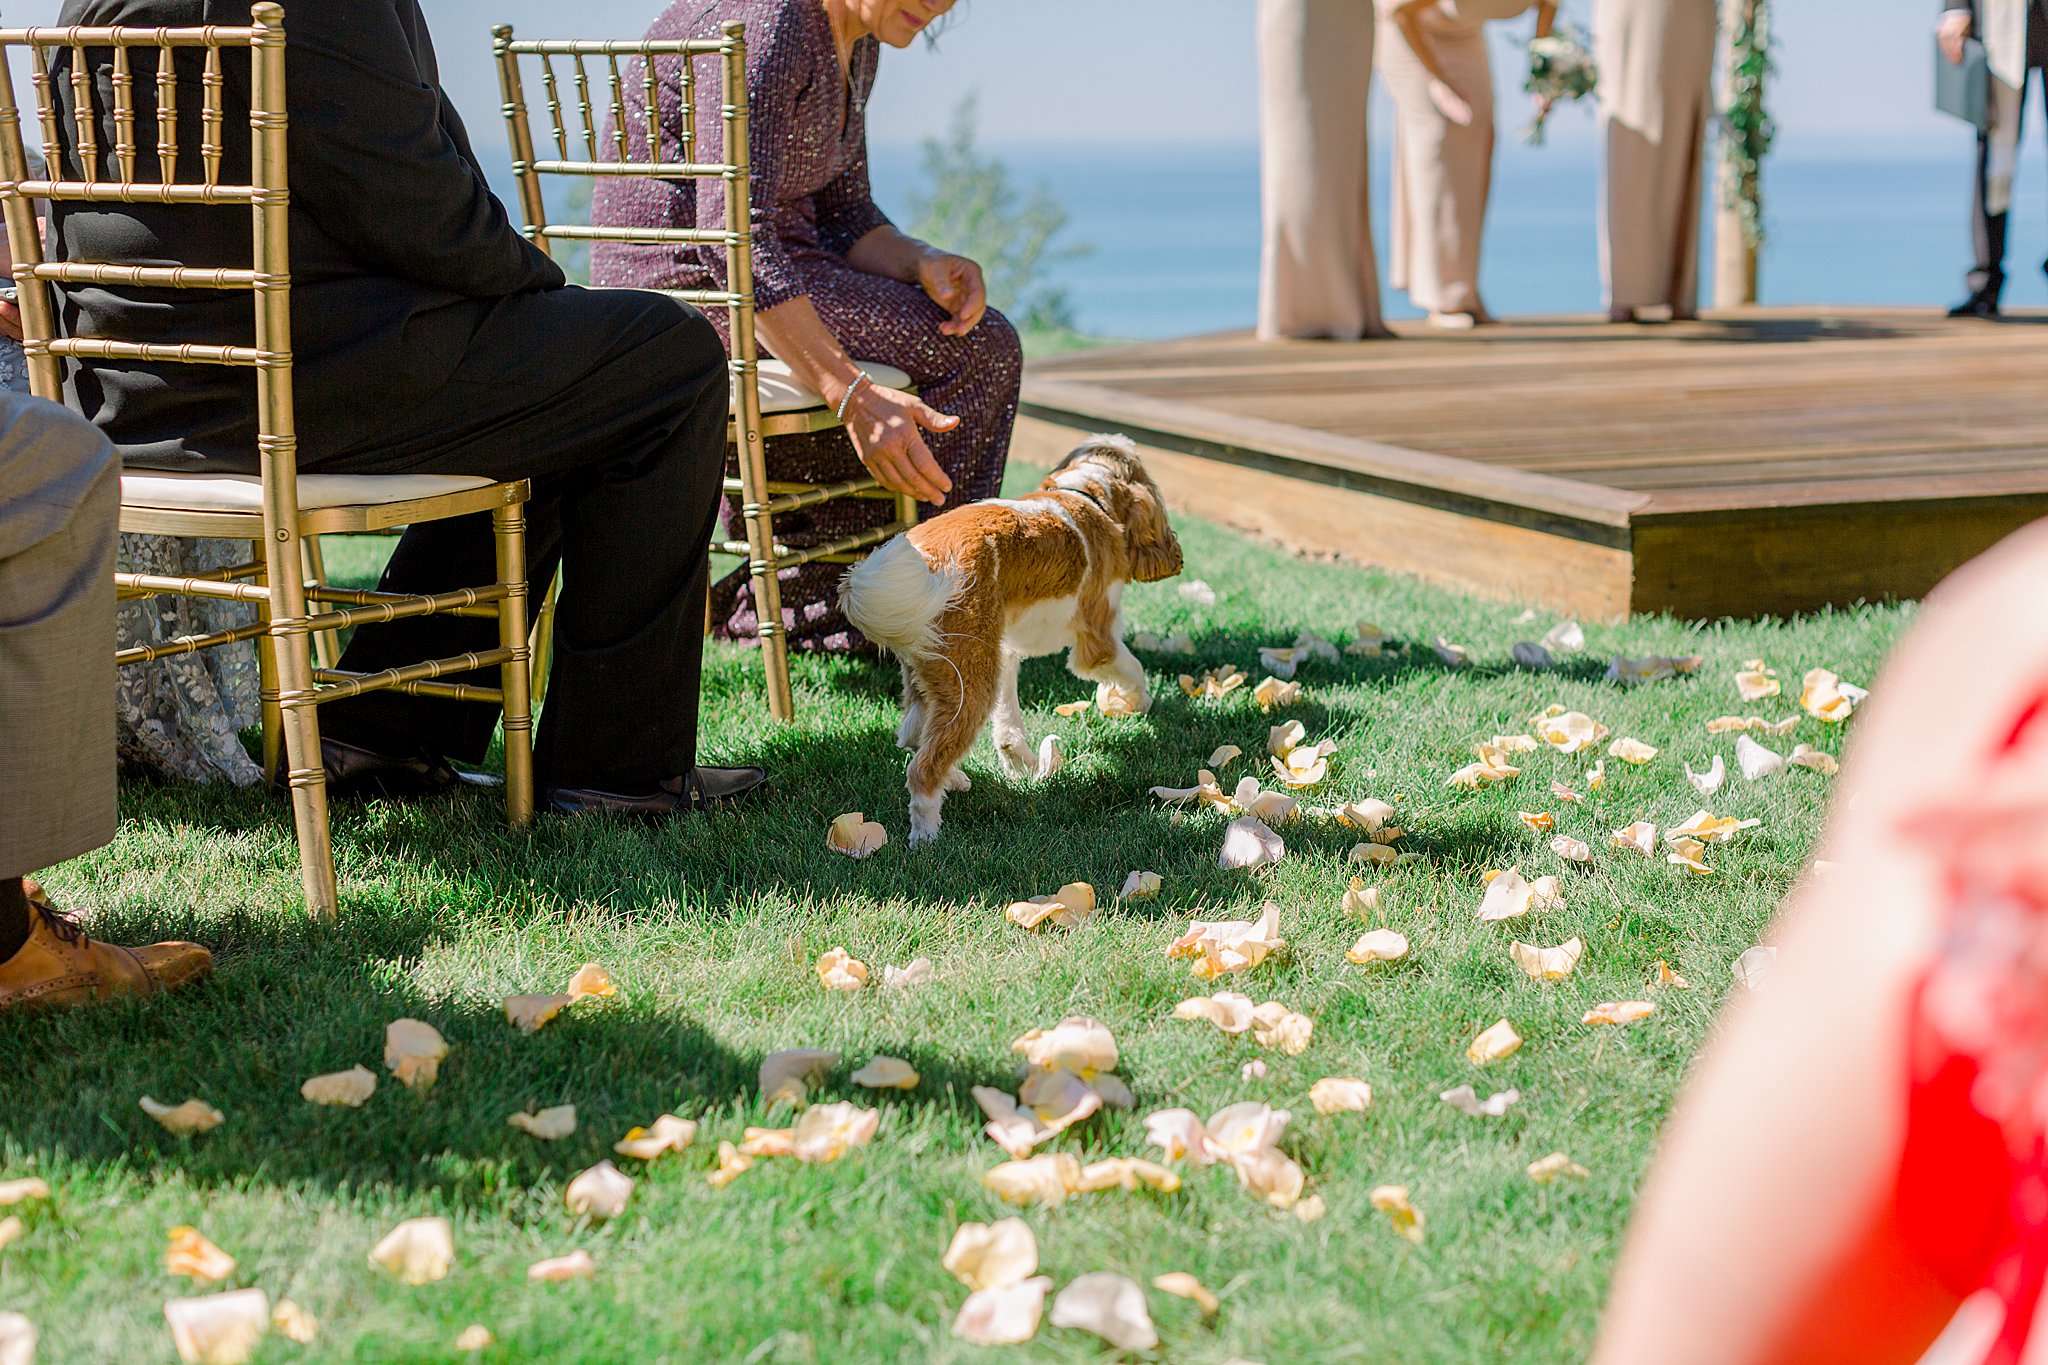 Bride's dog makes his way up the aisle during intimate Lake Michigan wedding ceremony.